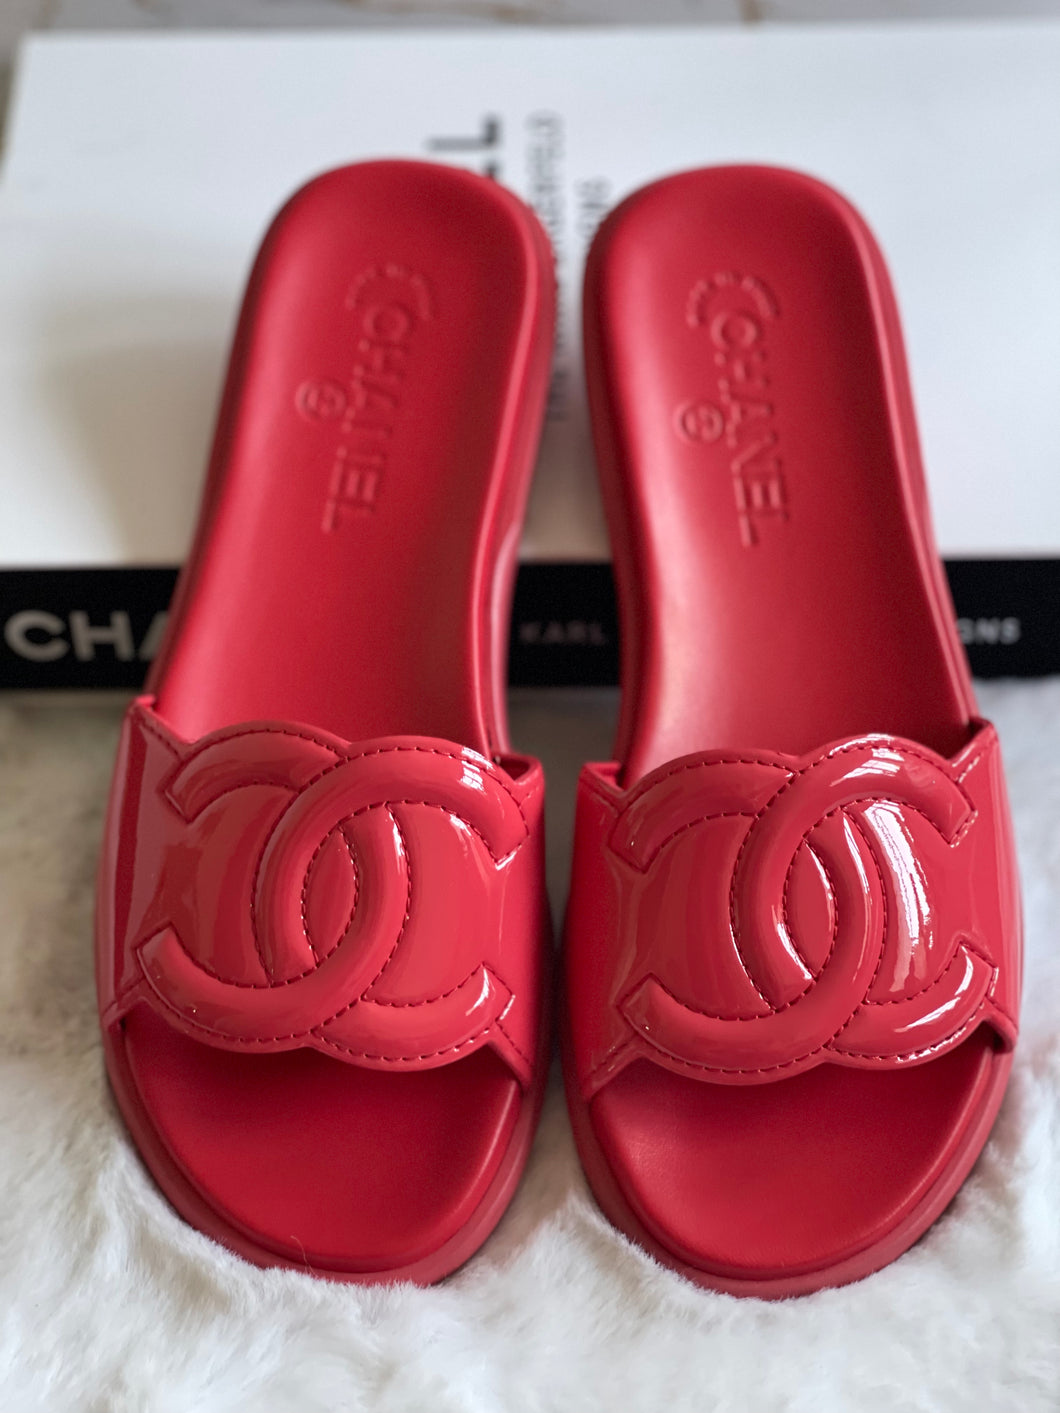 Chanel Red Rubber Sliders Size 38C